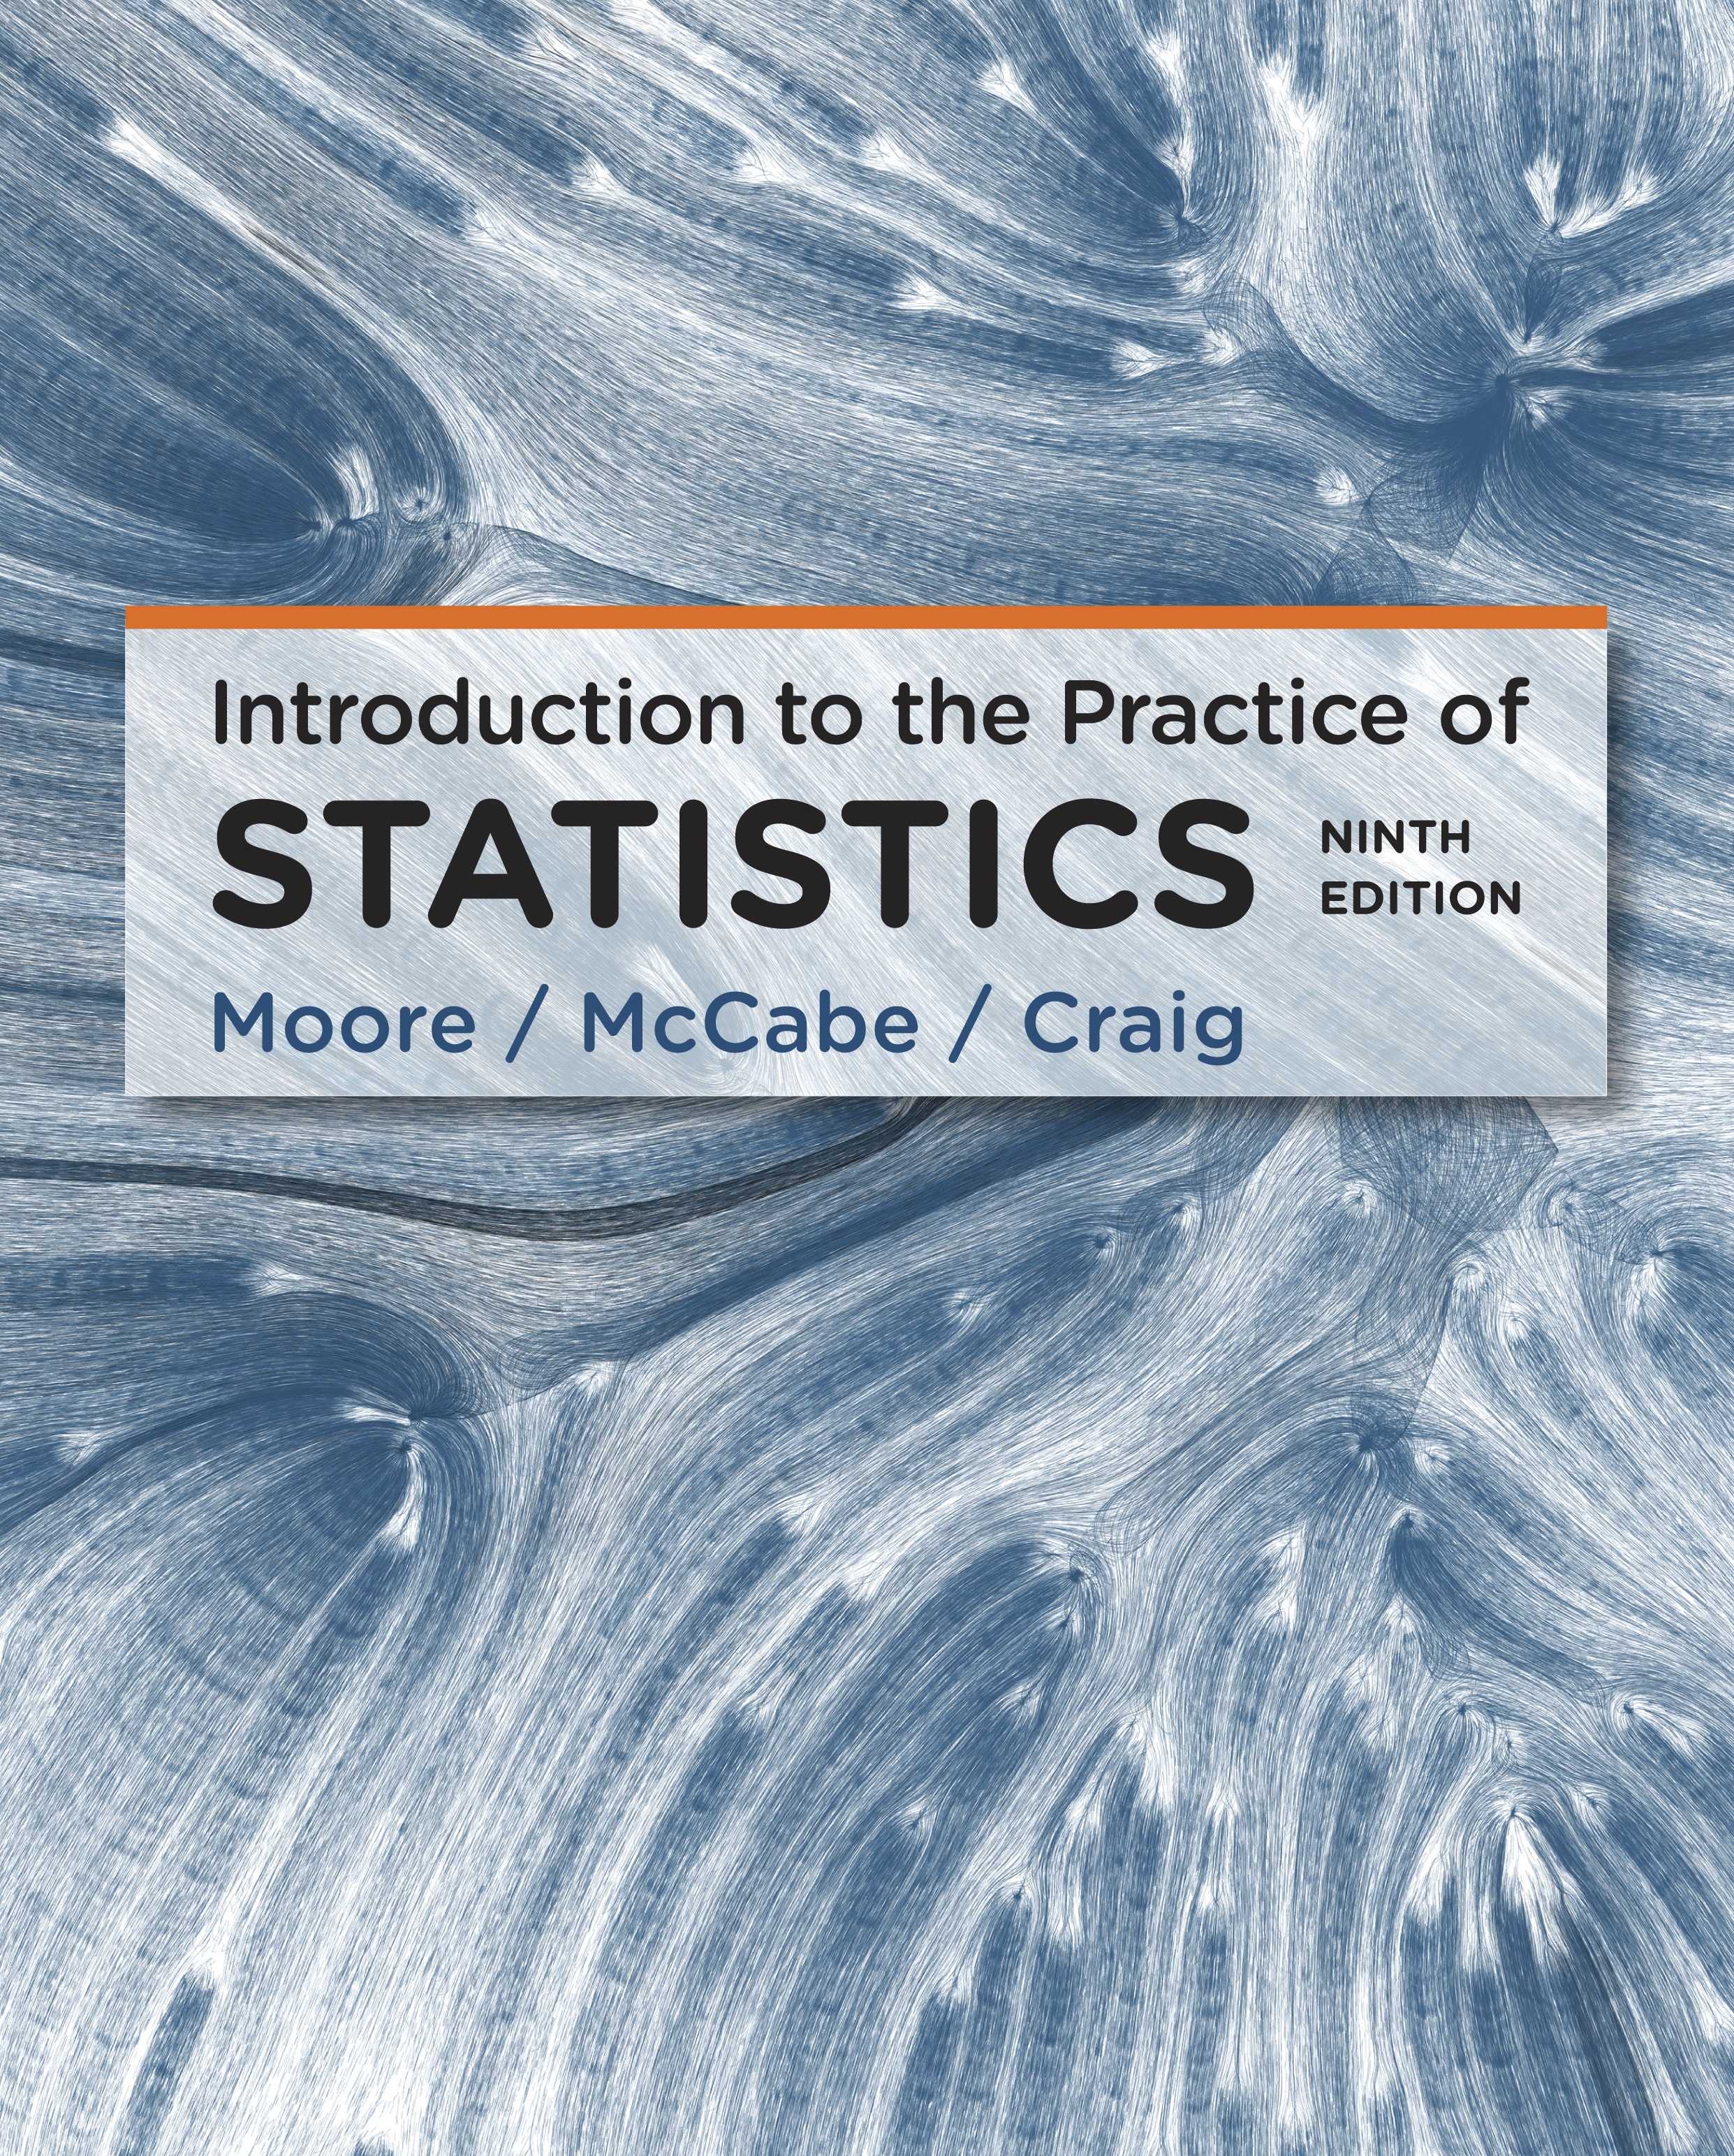 Introduction to Practice of Statistics cover